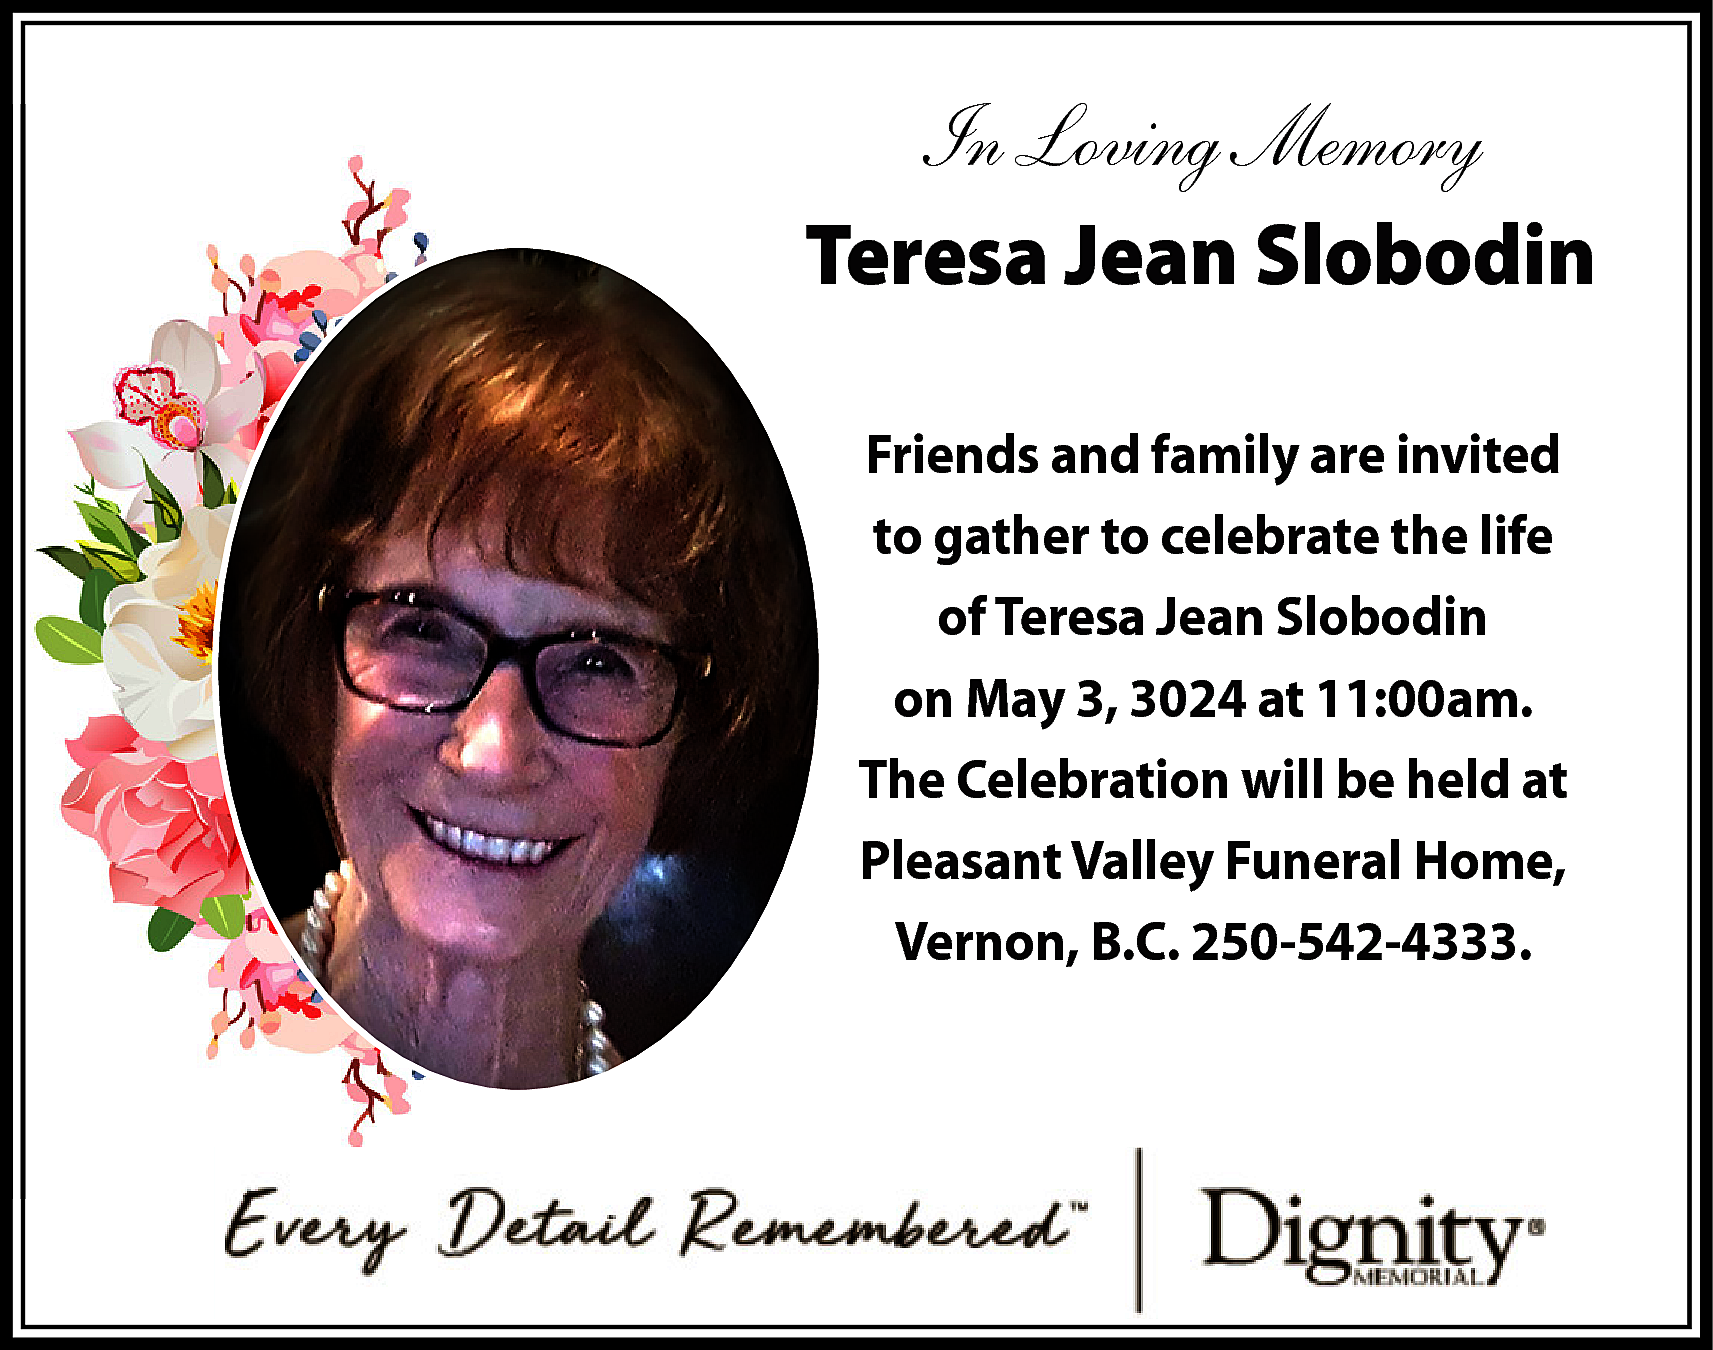 In Loving Memory <br>Teresa Jean  In Loving Memory  Teresa Jean Slobodin  Friends and family are invited  to gather to celebrate the life  of Teresa Jean Slobodin  on May 3, 3024 at 11:00am.  The Celebration will be held at  Pleasant Valley Funeral Home,  Vernon, B.C. 250-542-4333.    